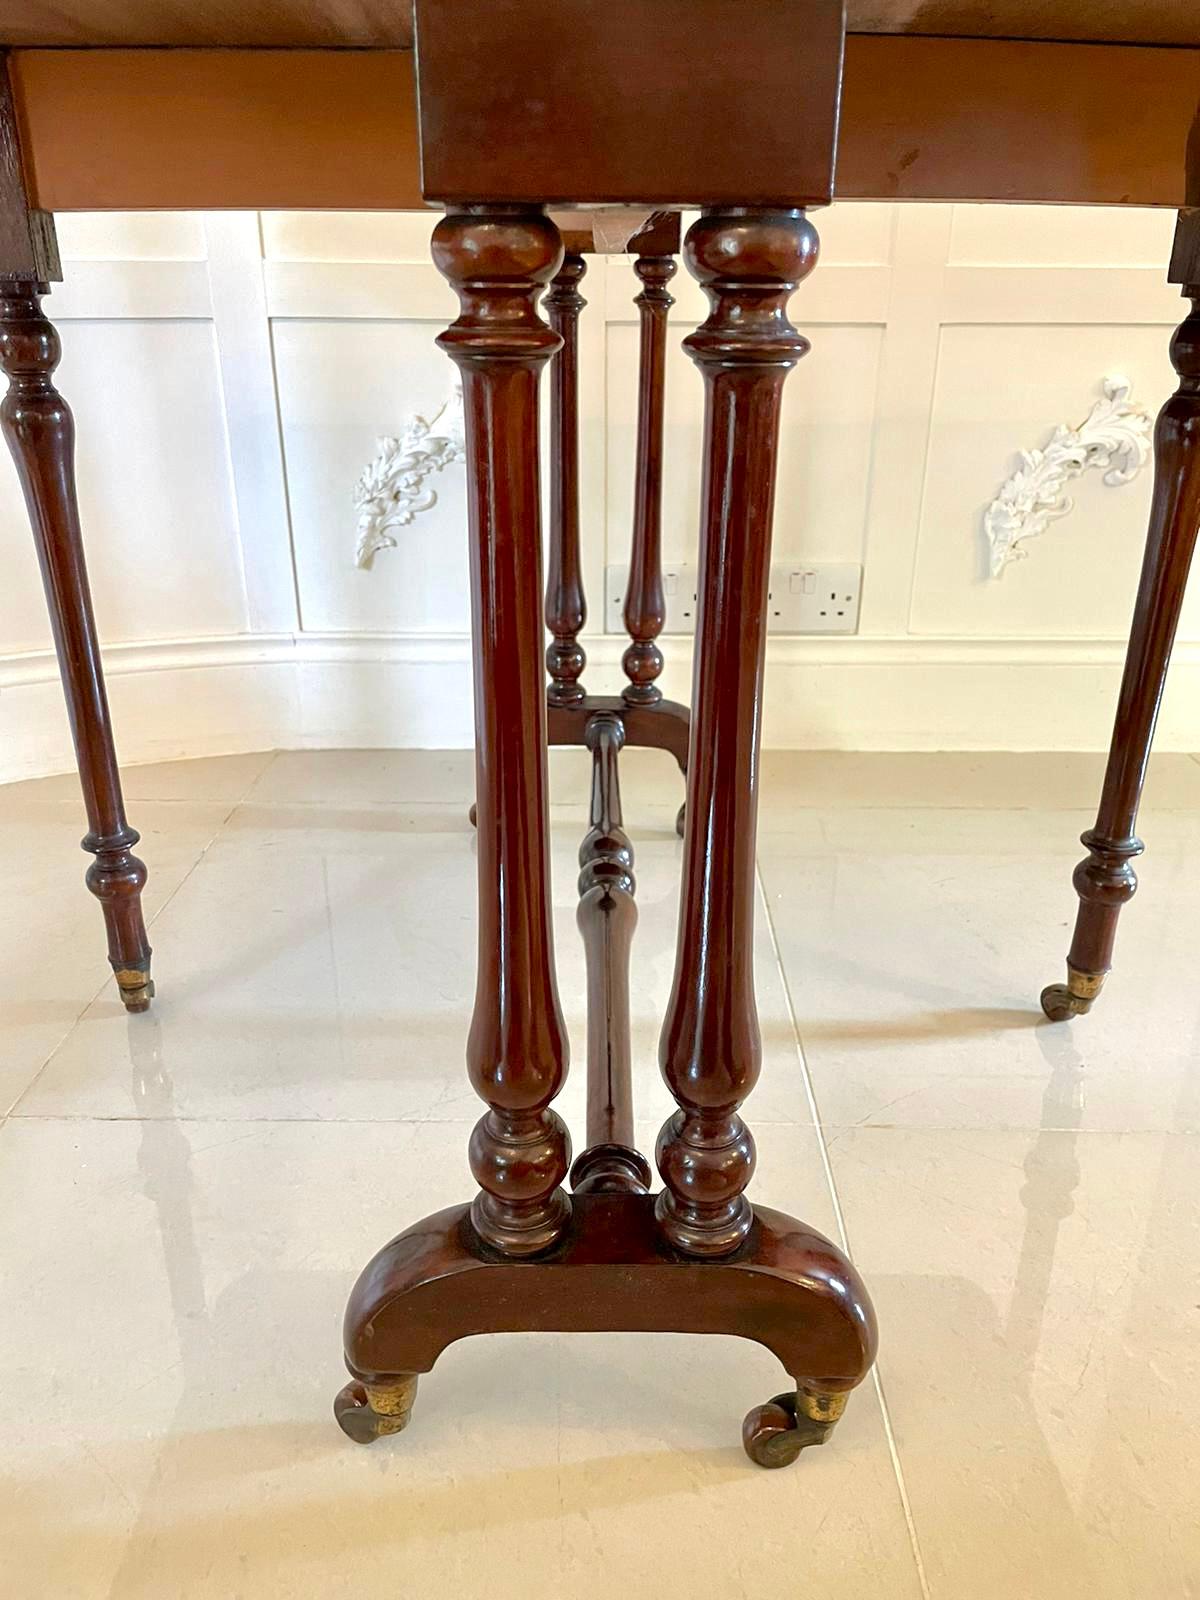 Turned Quality Antique Victorian Mahogany Sutherland Table For Sale